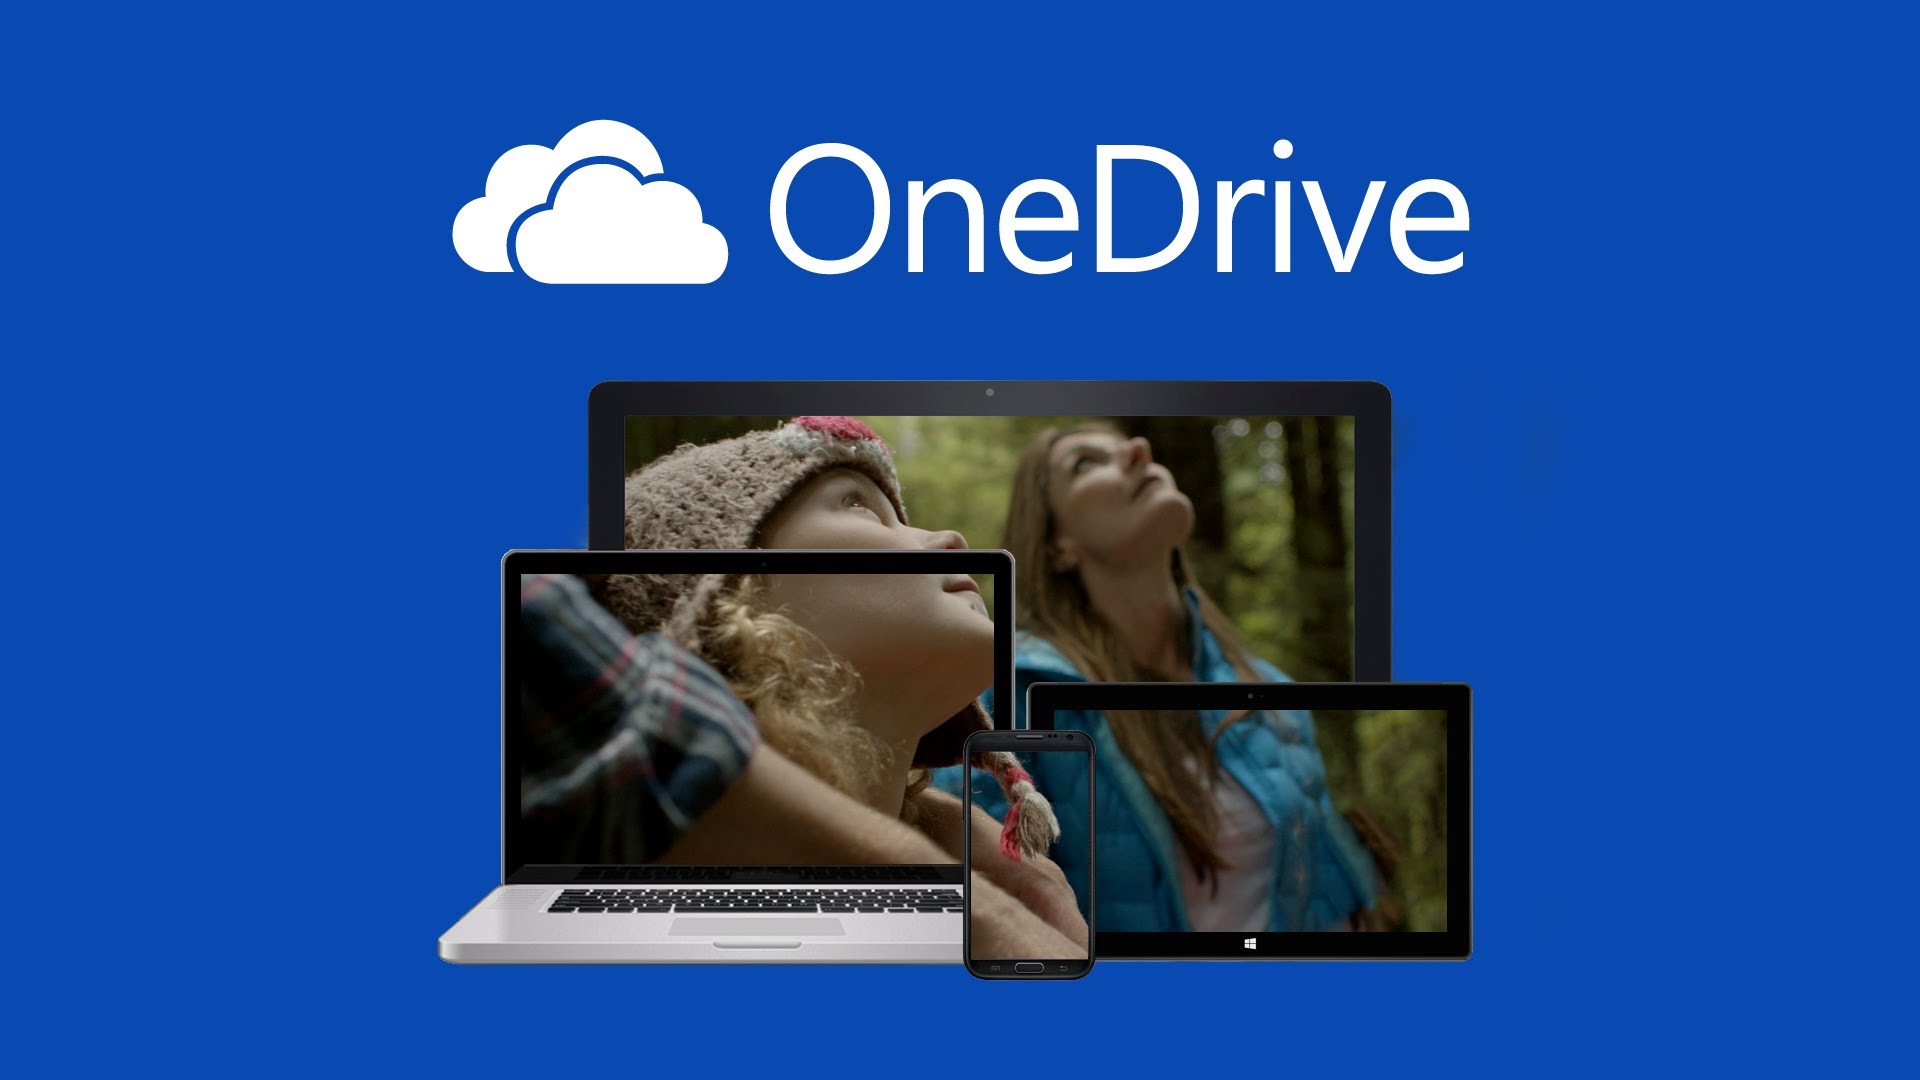 Welcome The Onedrive Uwp App For Windows 10 Pcs And Tablets Techcity